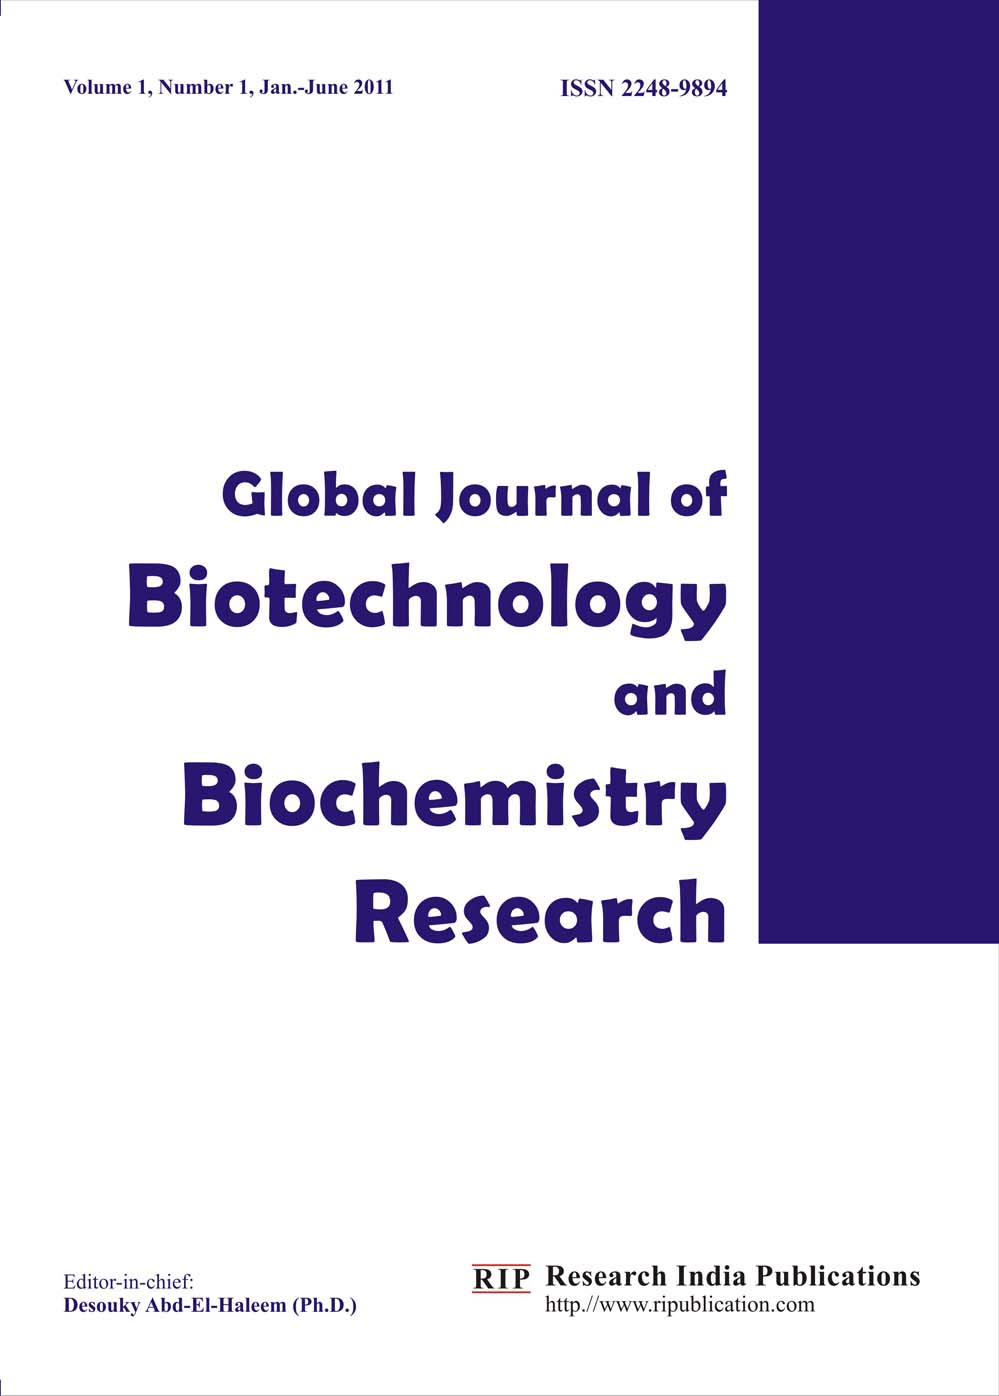 GJBBR, Global Journal of Biotechnology and Biochemistry Research